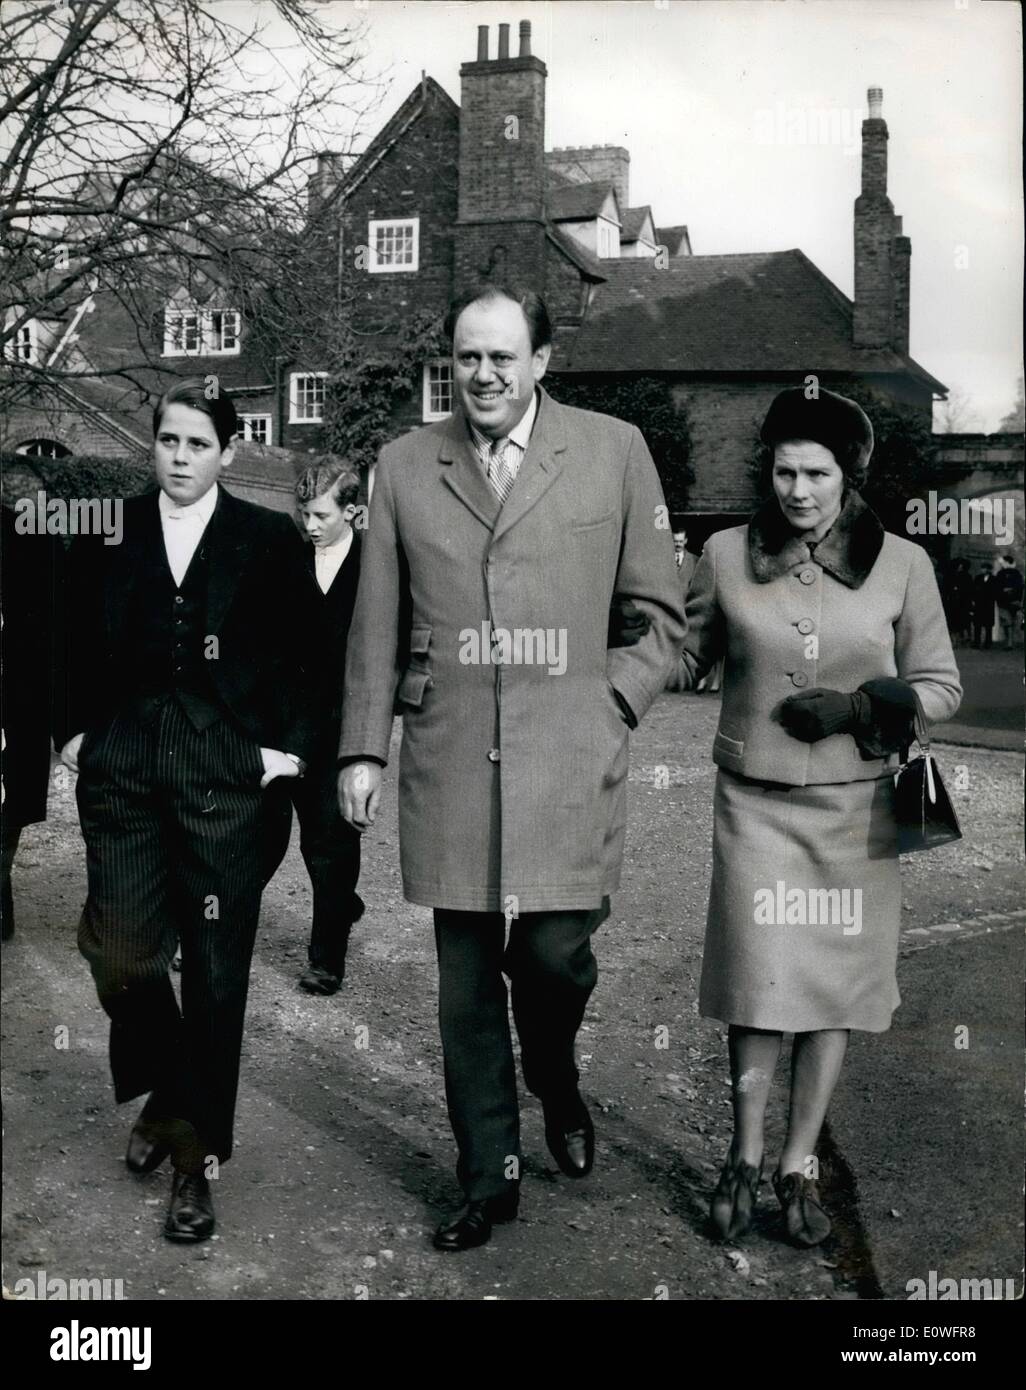 Nov. 11, 1962 - The Eton Wall Game Today.: The annual Eton Wall Game was once again played today at the public school when the Collegers and Oppodans teams met in the unexplainable struggle. Photo shows Minister of Agriculture Christopher Soames, his wife, and son Nicholas, leaving the grounds after the game today. Stock Photo